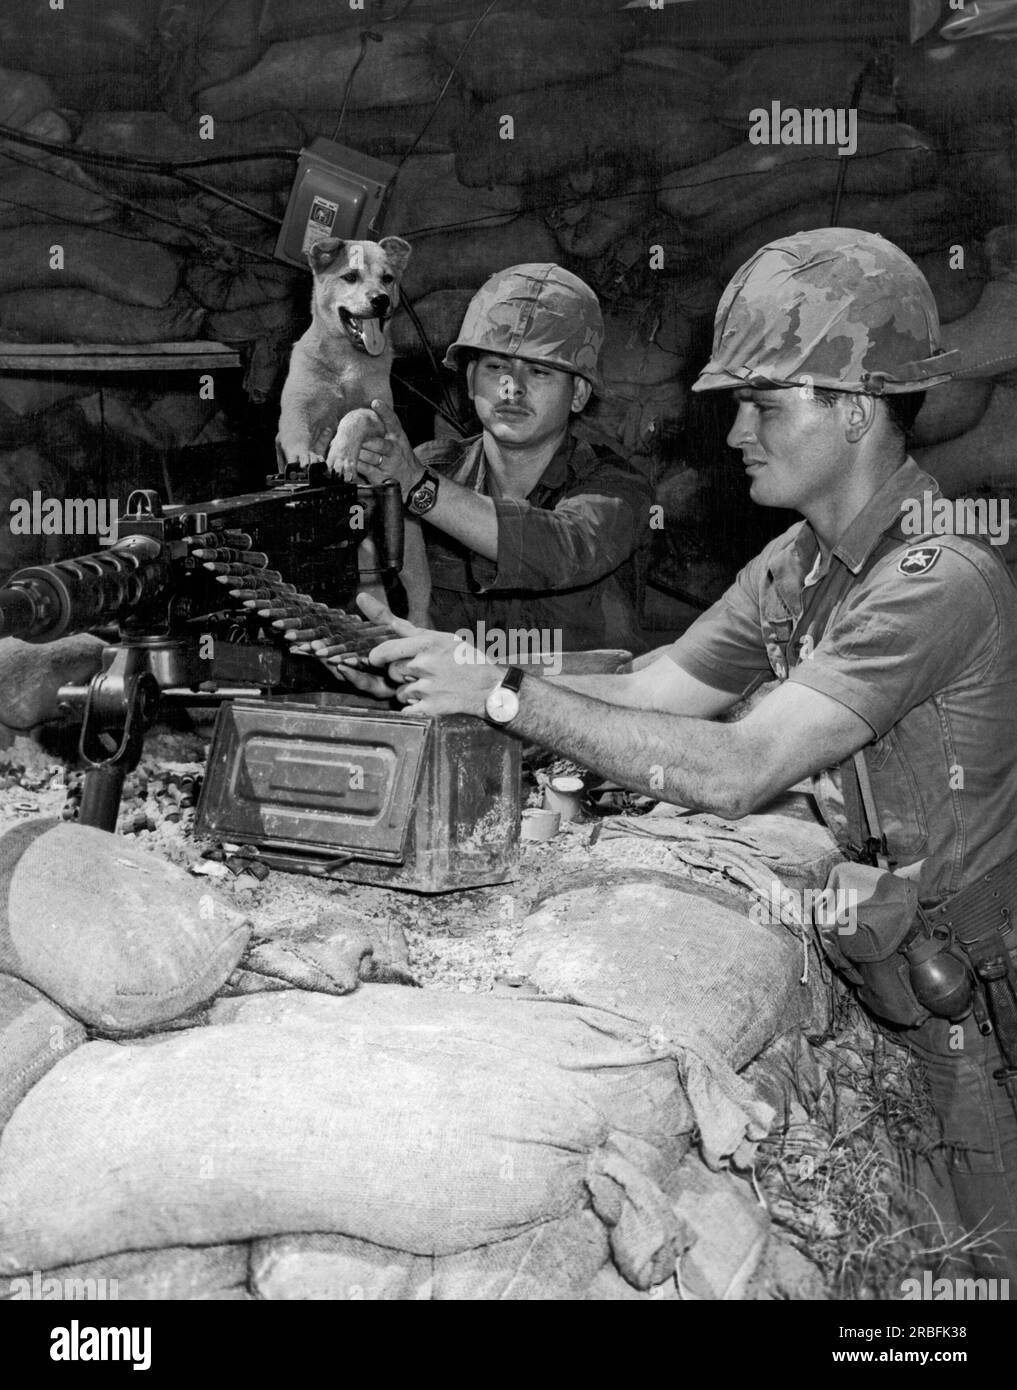 Dong Ha, Vietnam:  February 25, 1966 An Air Force MP removes his mascot, 'Bandit' from the breach of the .50 caliber machine gun so that he and his fellow Air Force MP can check out the  weapon before their duty. Stock Photo